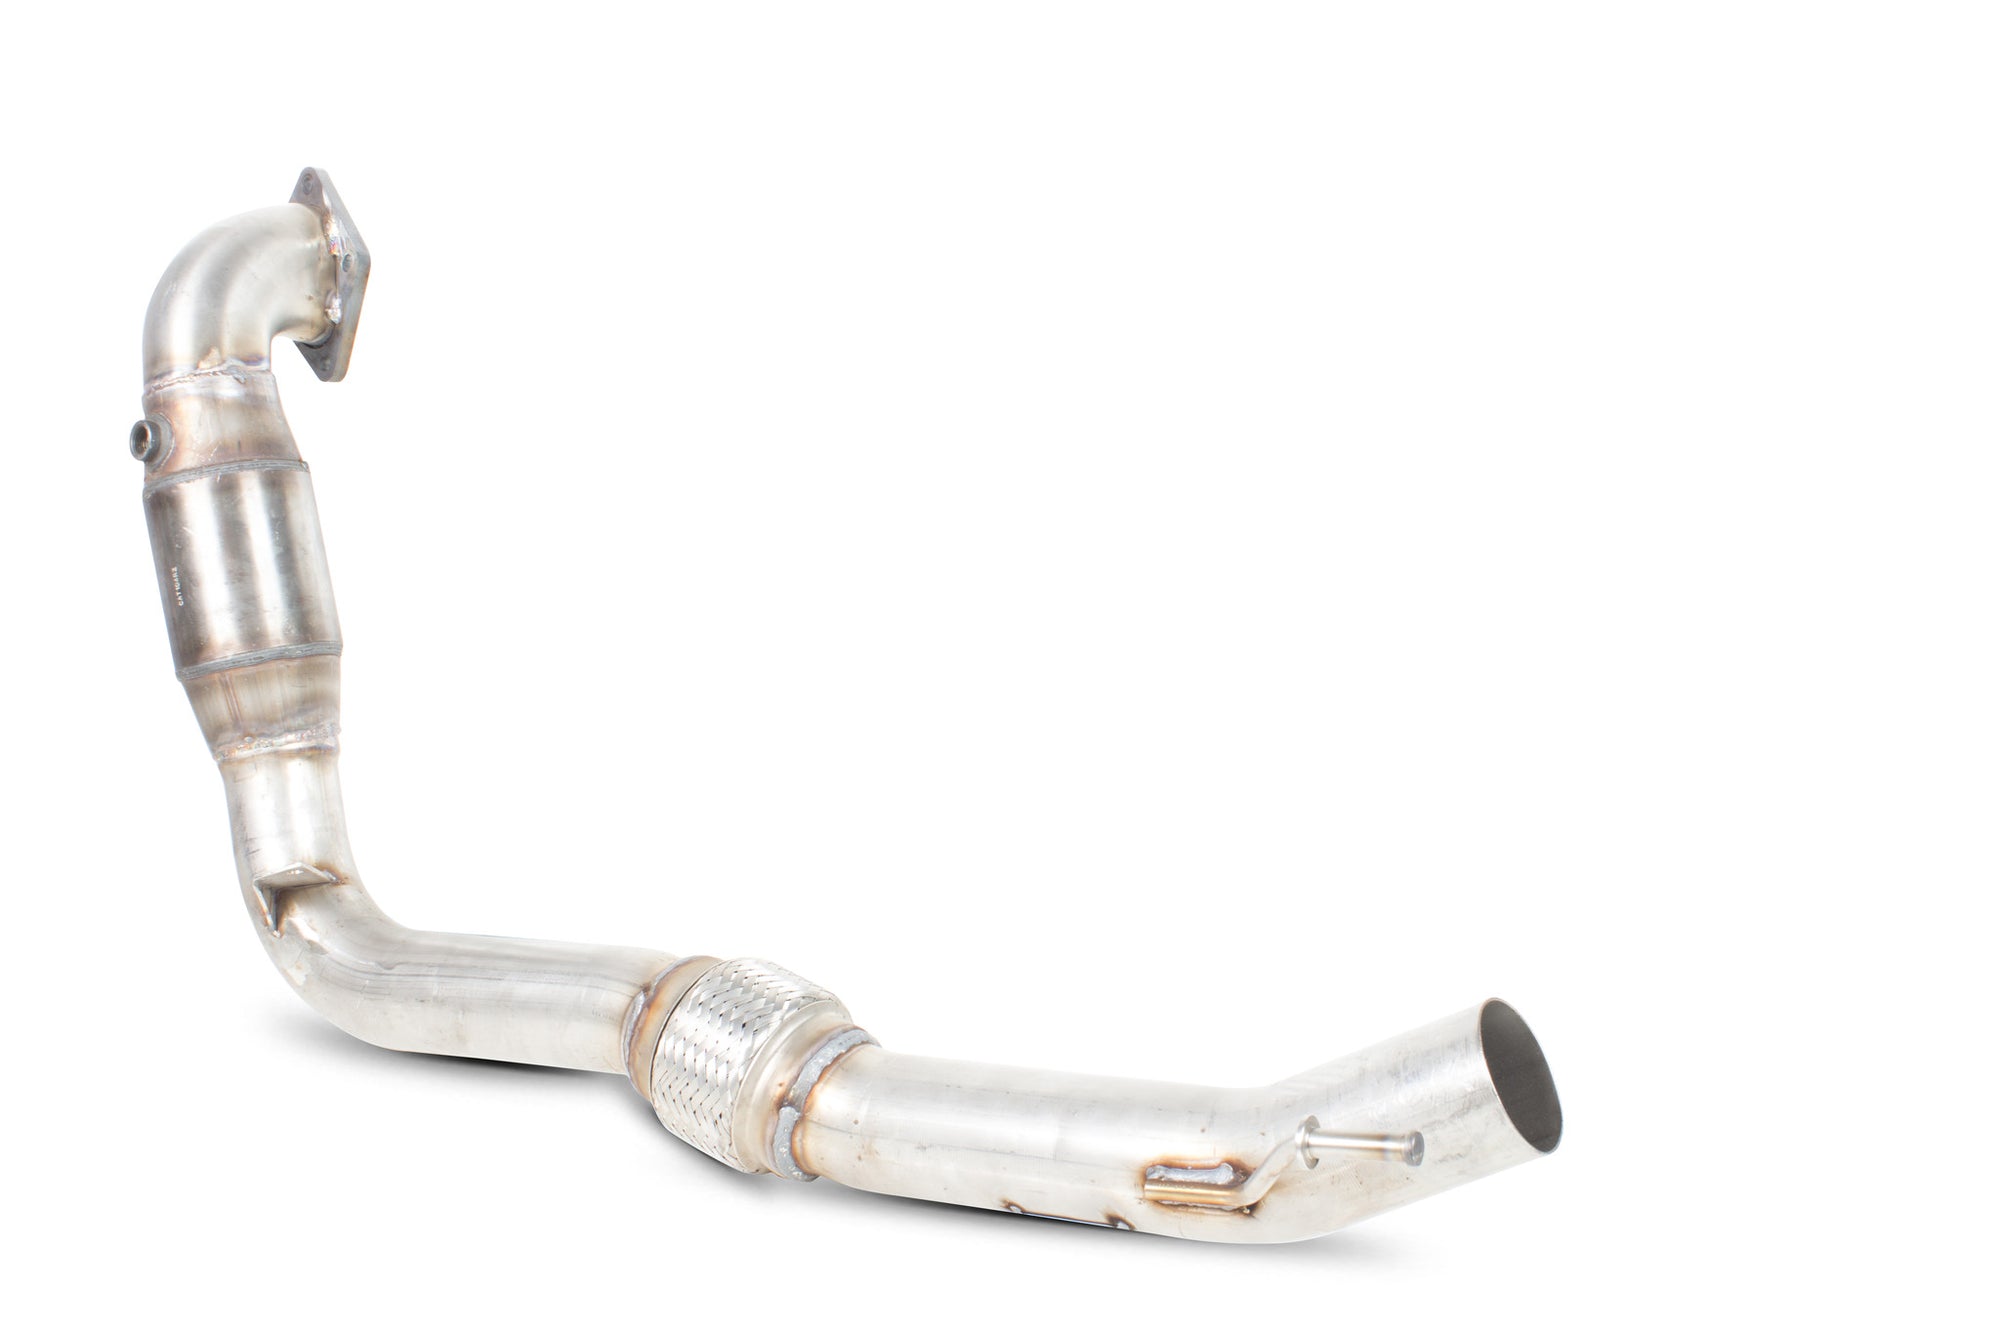 Volkswagen Polo Gti 1.4TSi 180PS Downpipe with high flow sports catalyst (non-resonated)